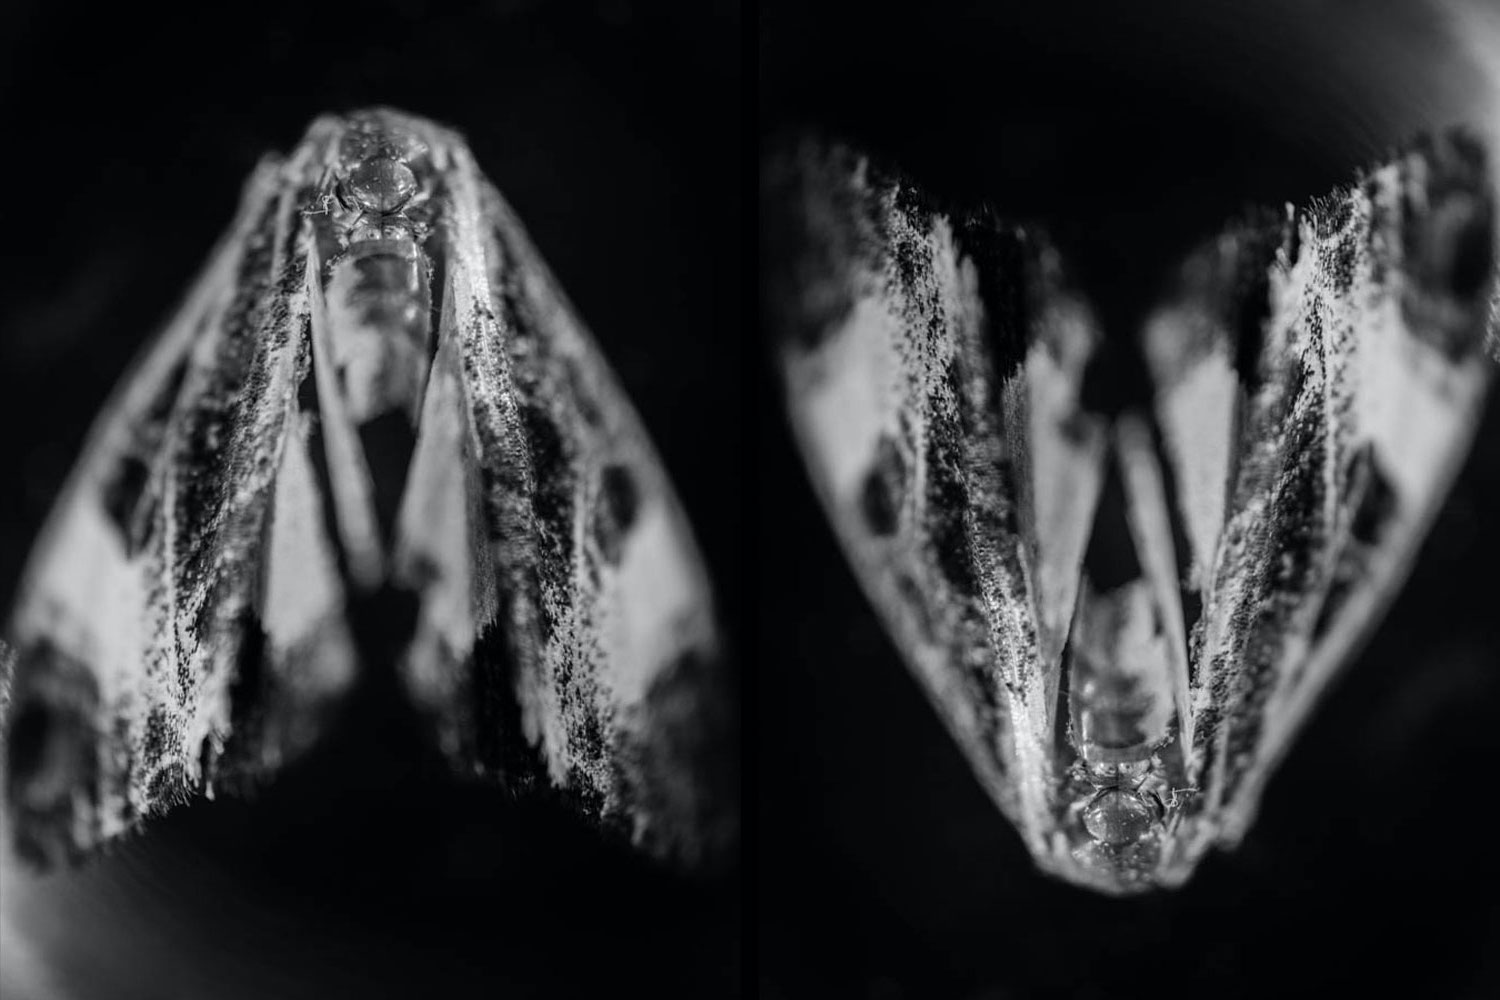 Moth wing art black and white photograph.